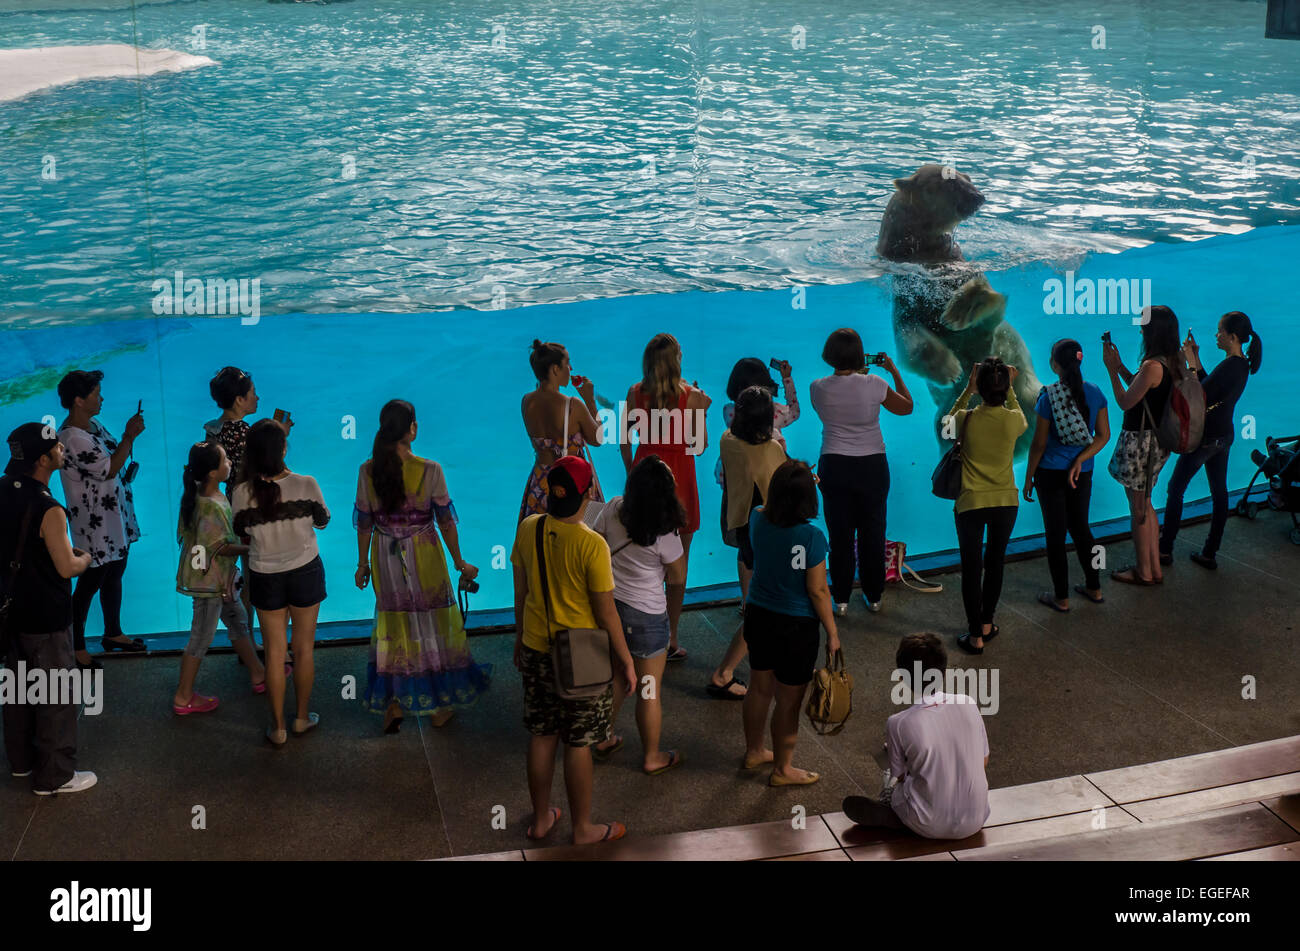 A group of people taking pictures of a polar bear at the Singapore Zoo Stock Photo